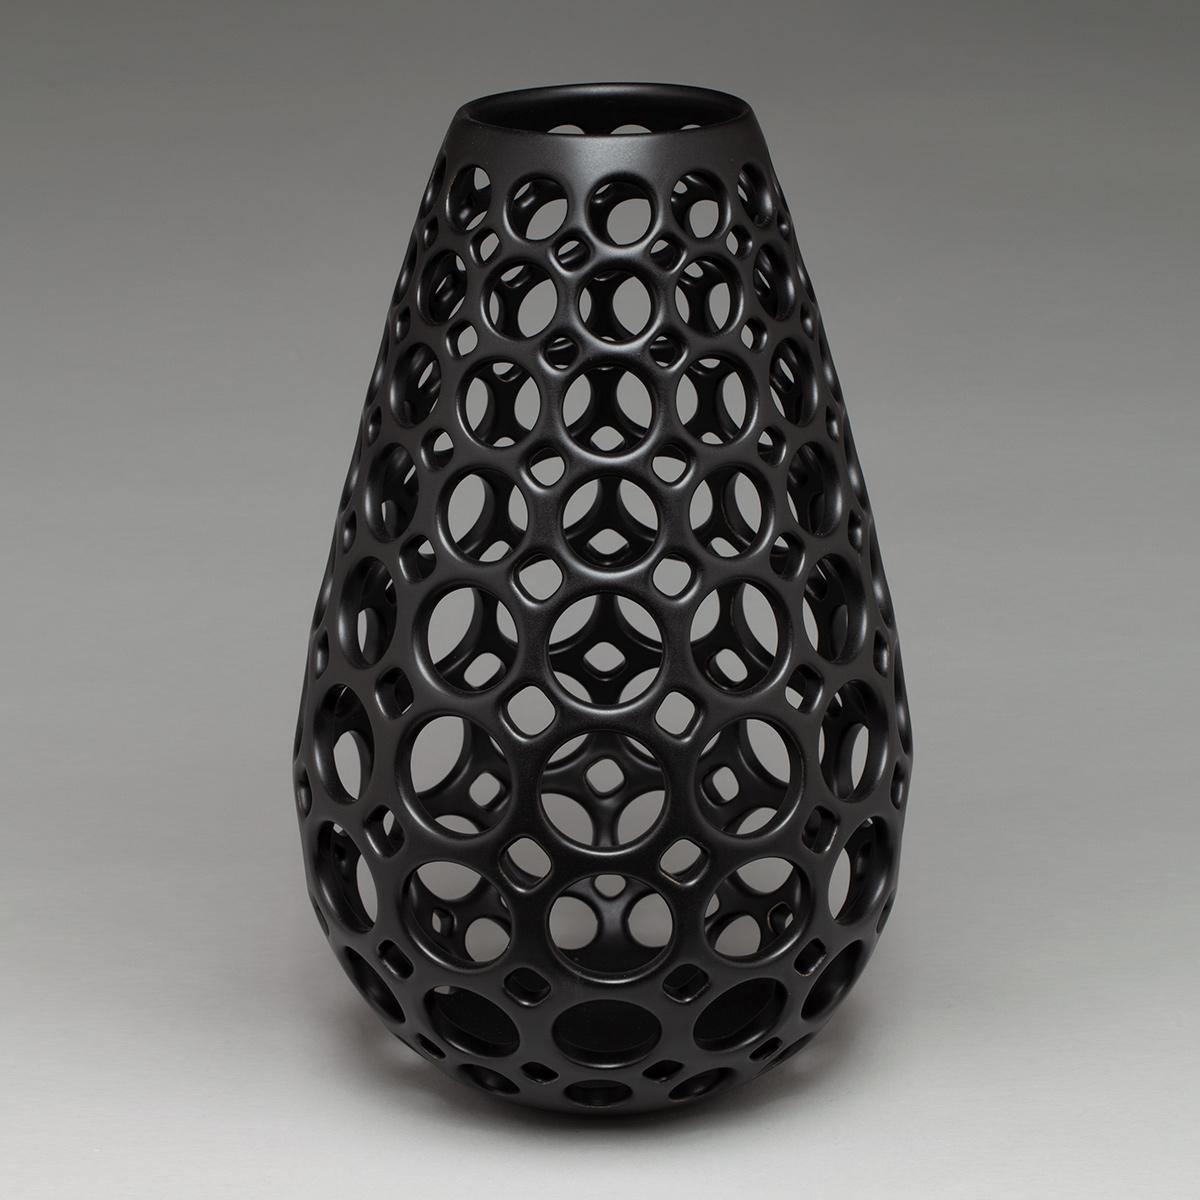 Inspired by Mid-Century Modern design, this piece is wheel thrown and hand pierced stoneware with a black satin glaze. Small holes are created when the clay is still wet and then each hole is painstakingly enlarged and smoothed when the clay is bone